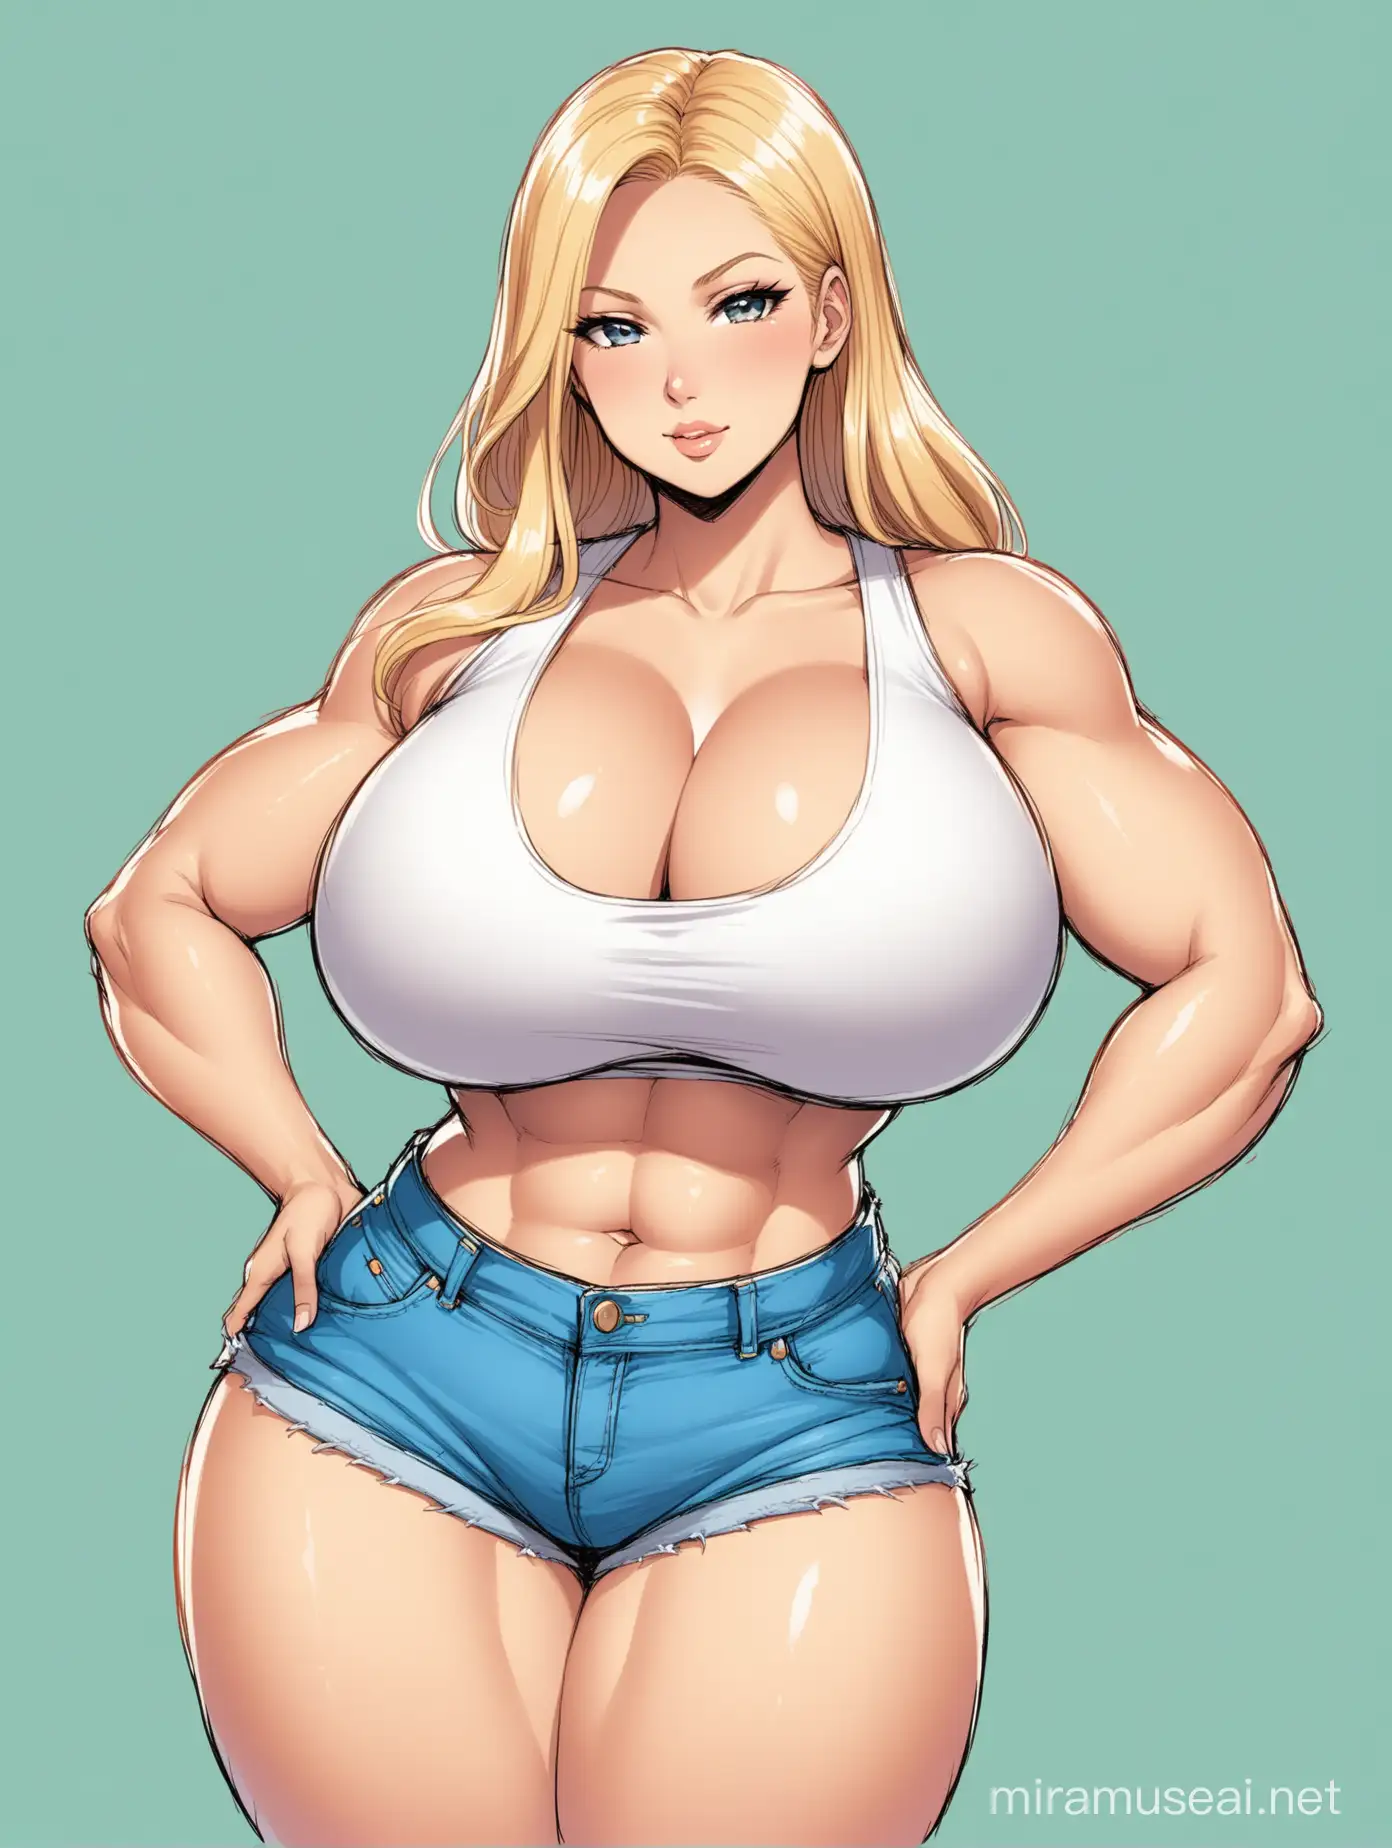 Blond Woman with Enormous Chest Wearing Casual Clothing